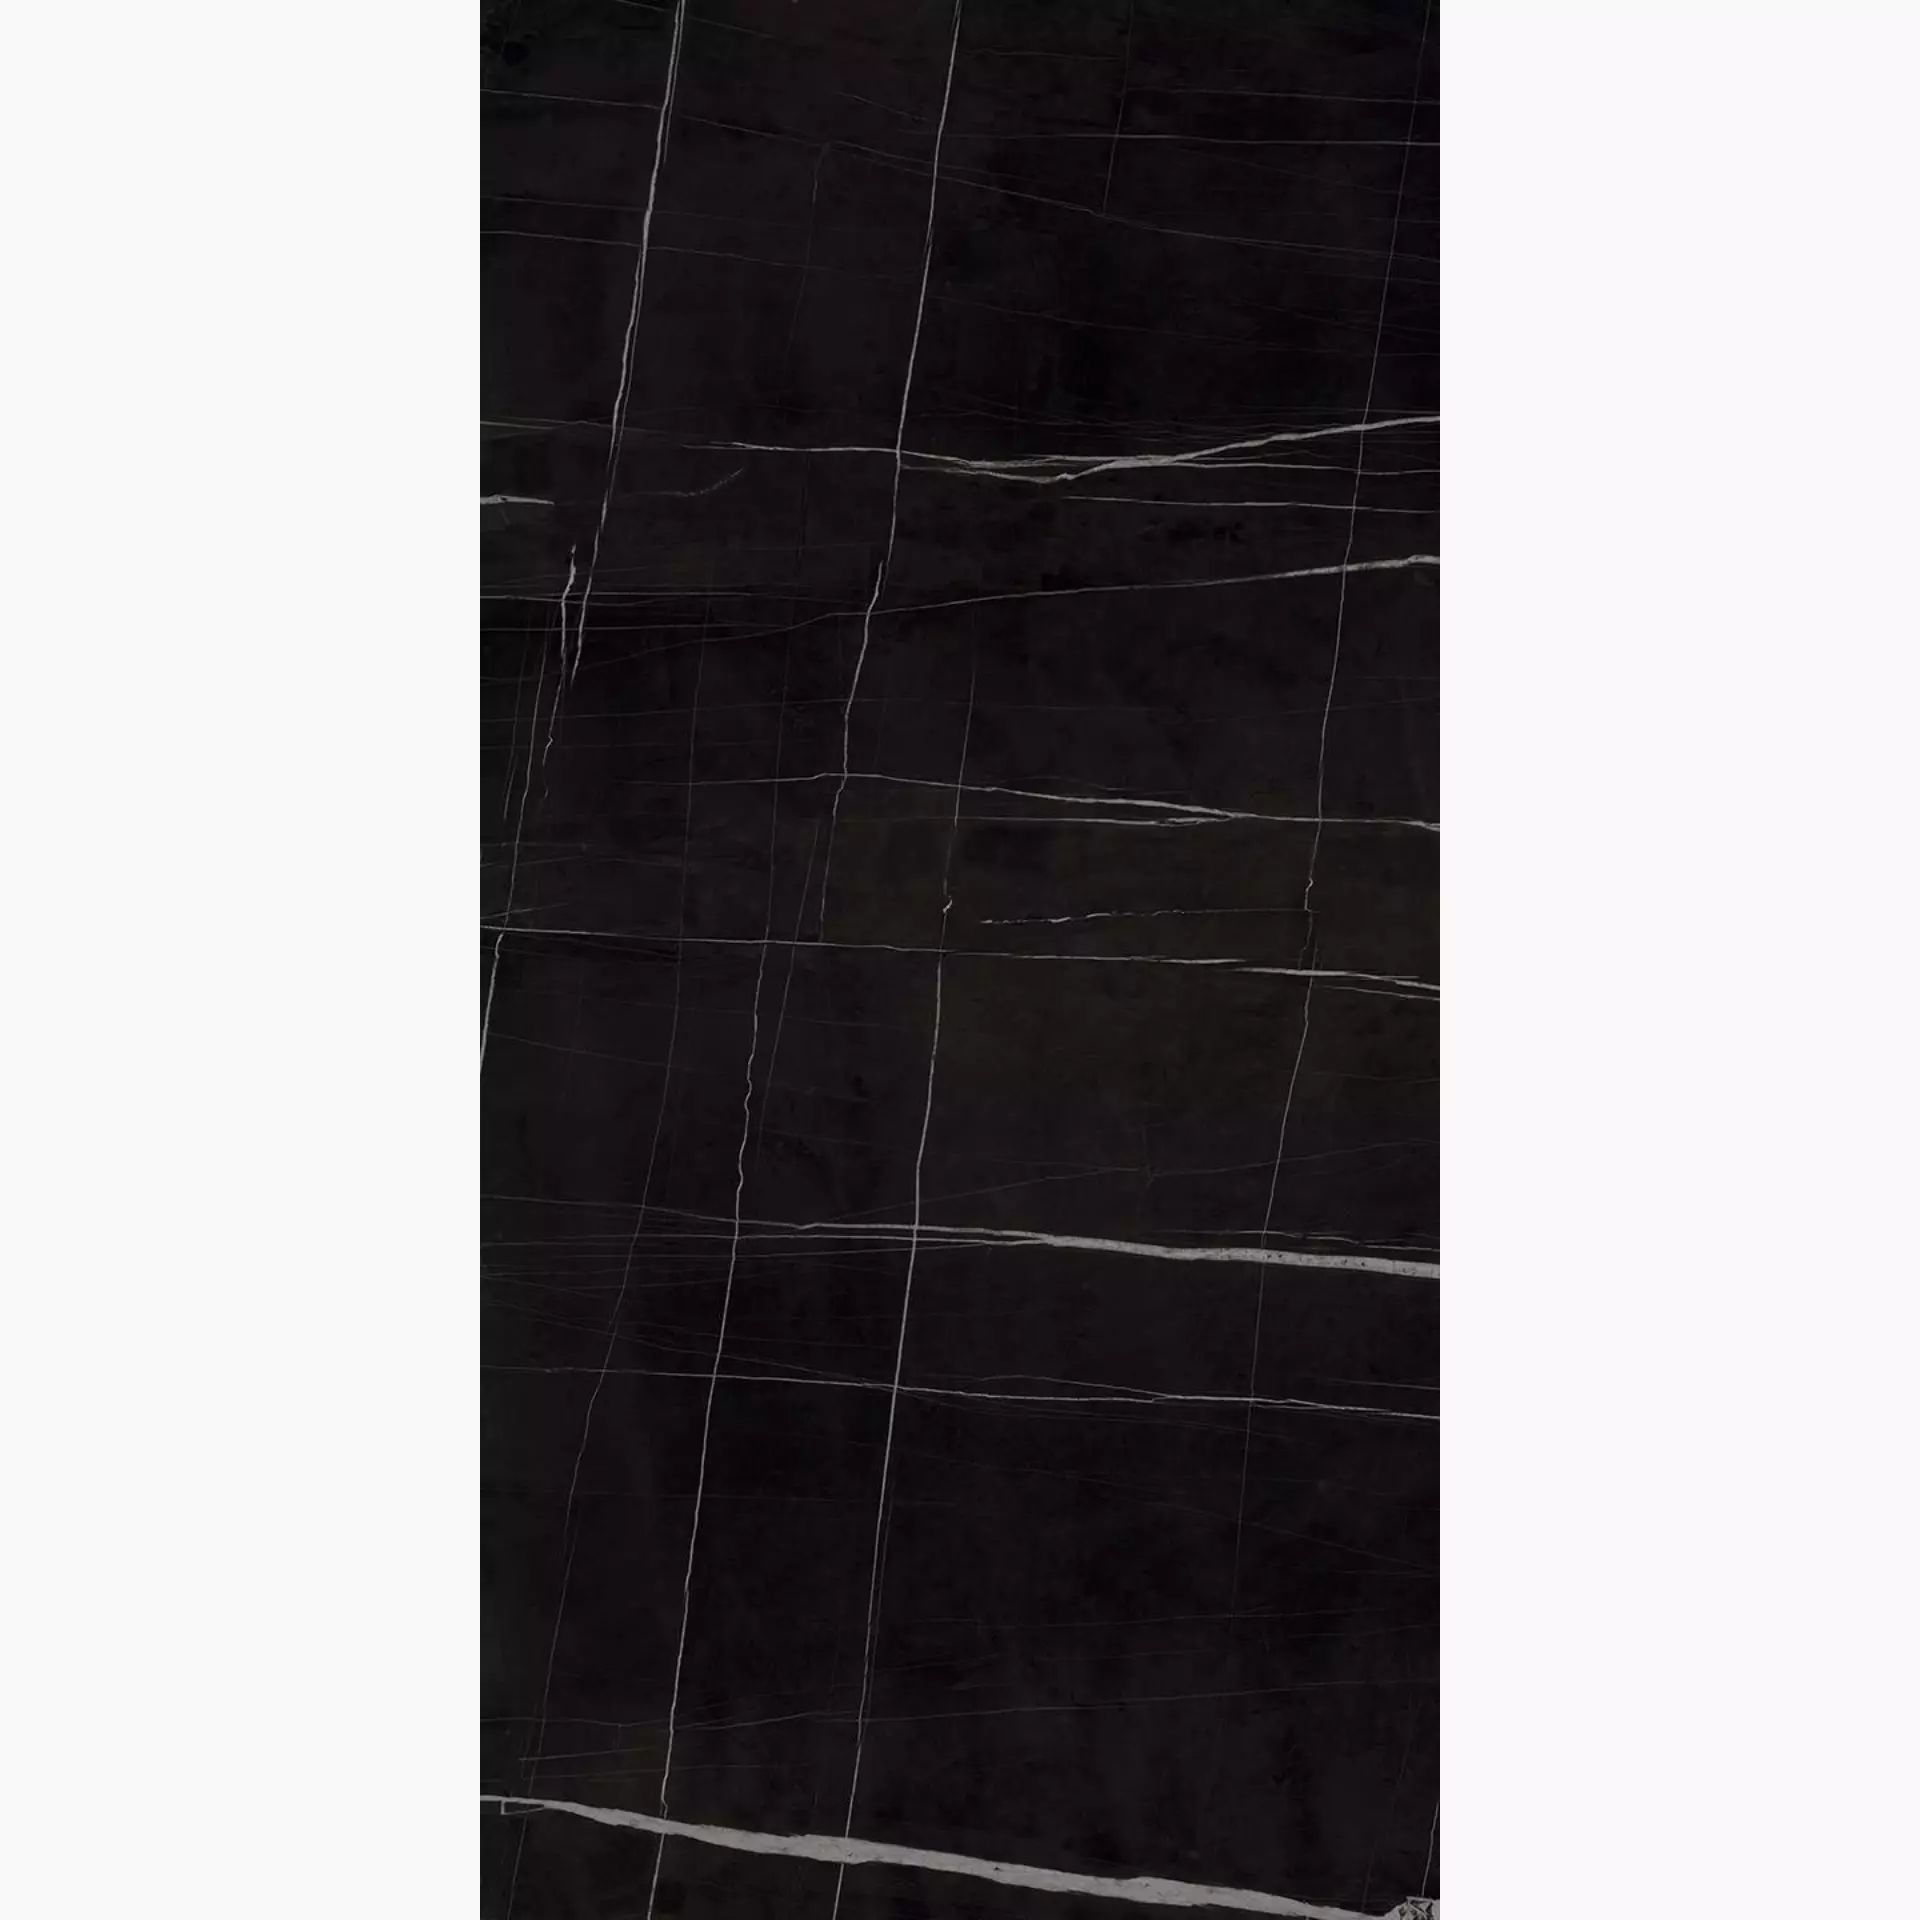 Fondovalle Infinito 2.0 Sahara Noir Glossy INF830 60x120cm rectified 6,5mm